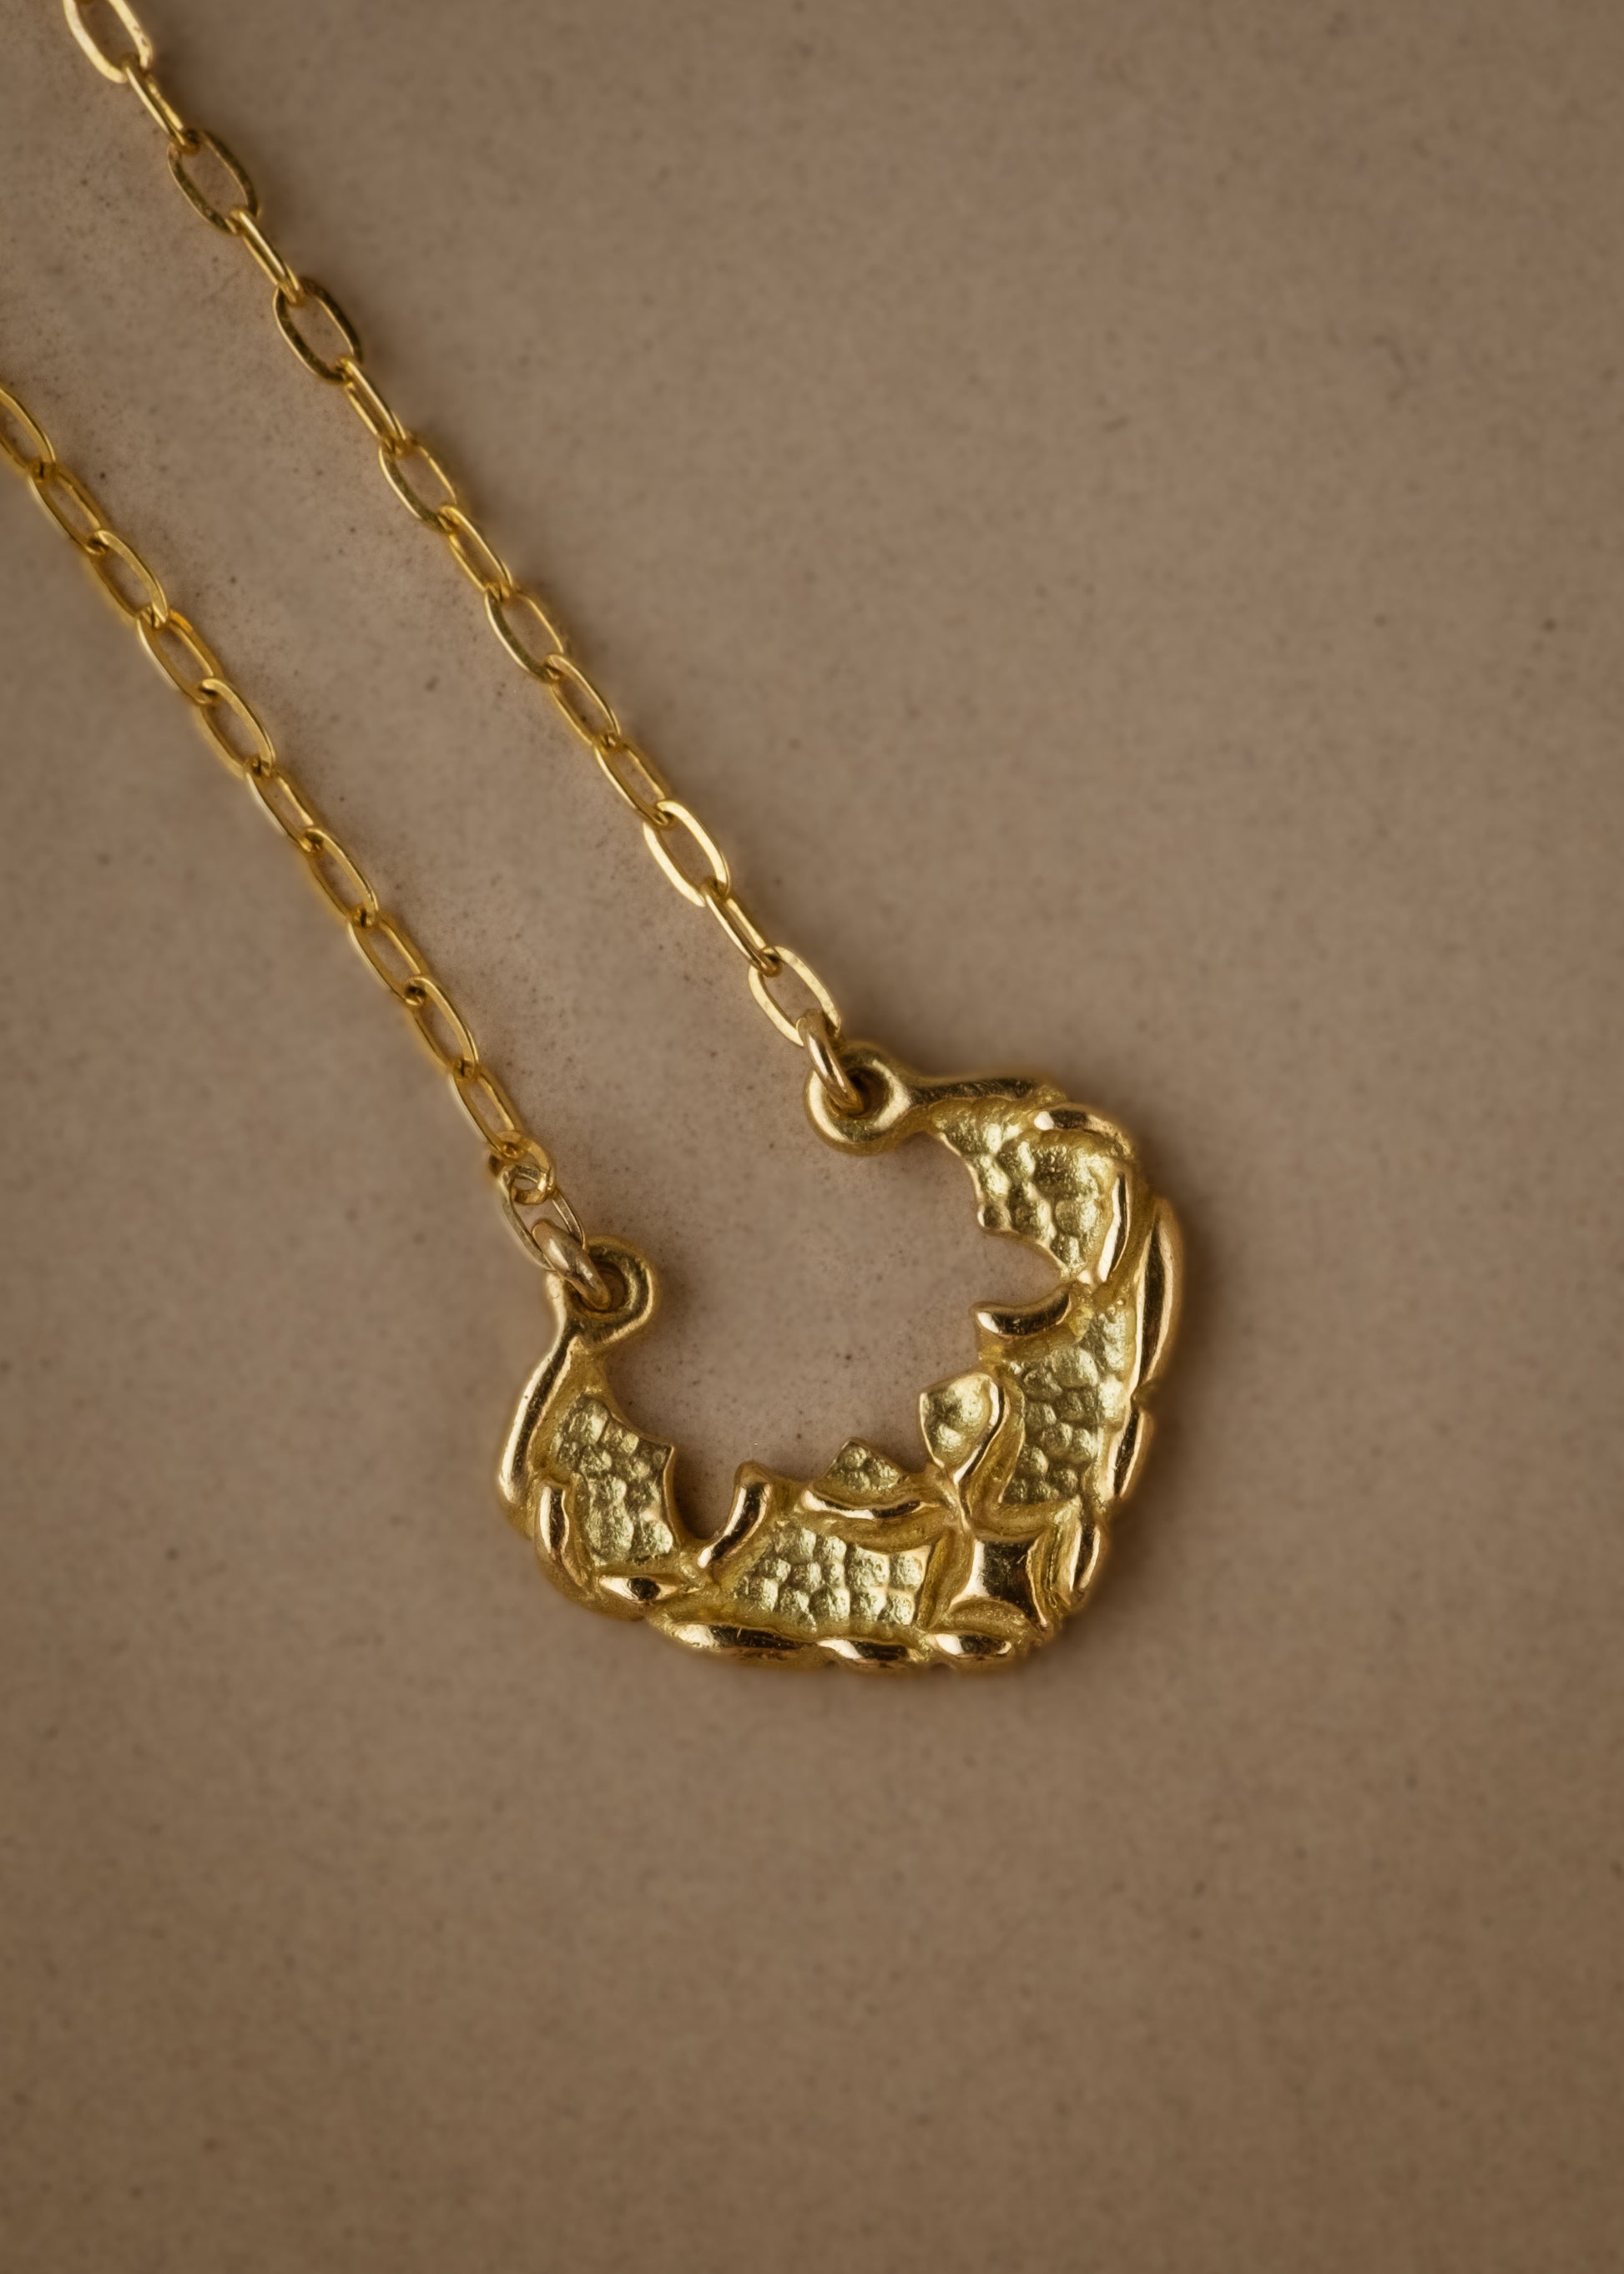 Named for the goddess of the sea, the Sedna necklace mirrors the undulating rhythm of the ocean. Gold waves expand and recede, revealing detailed texture that invites the eye to linger—a piece evocative of infinite strength and power. 